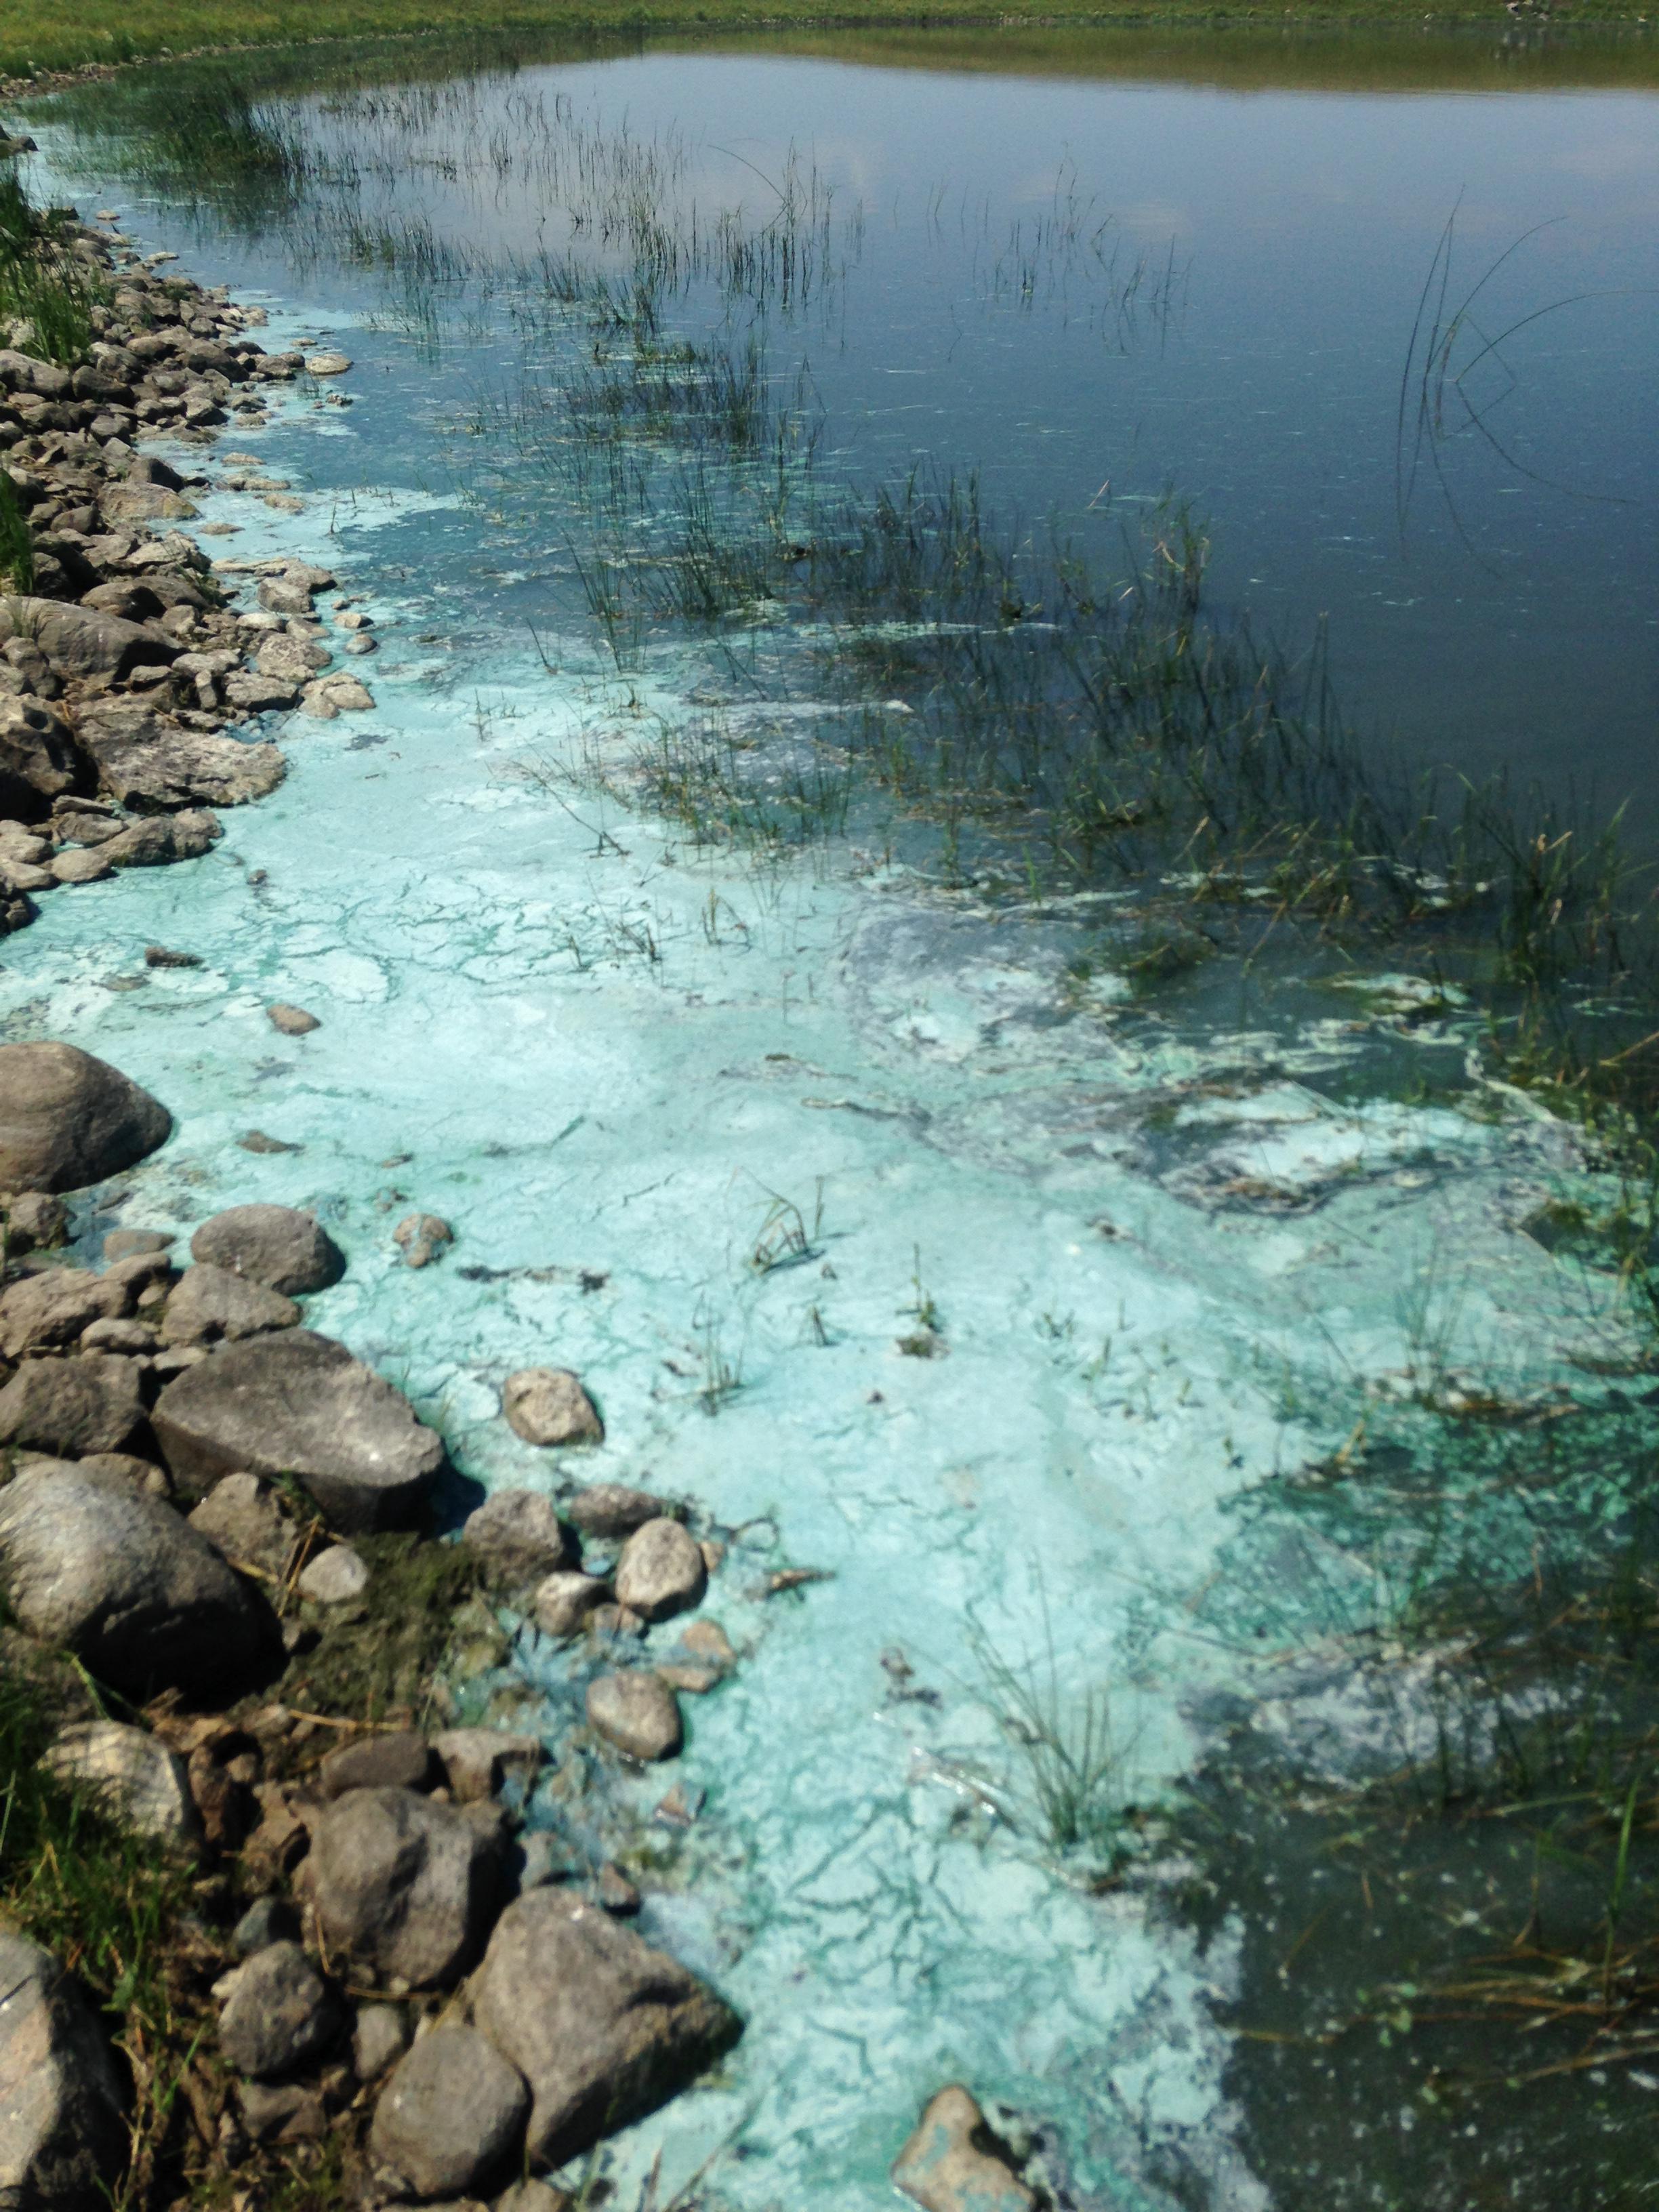 Some species of cyanobacteria, also known as blue-green algae, can be toxic when ingested by livestock and wildlife. (NDSU photo)